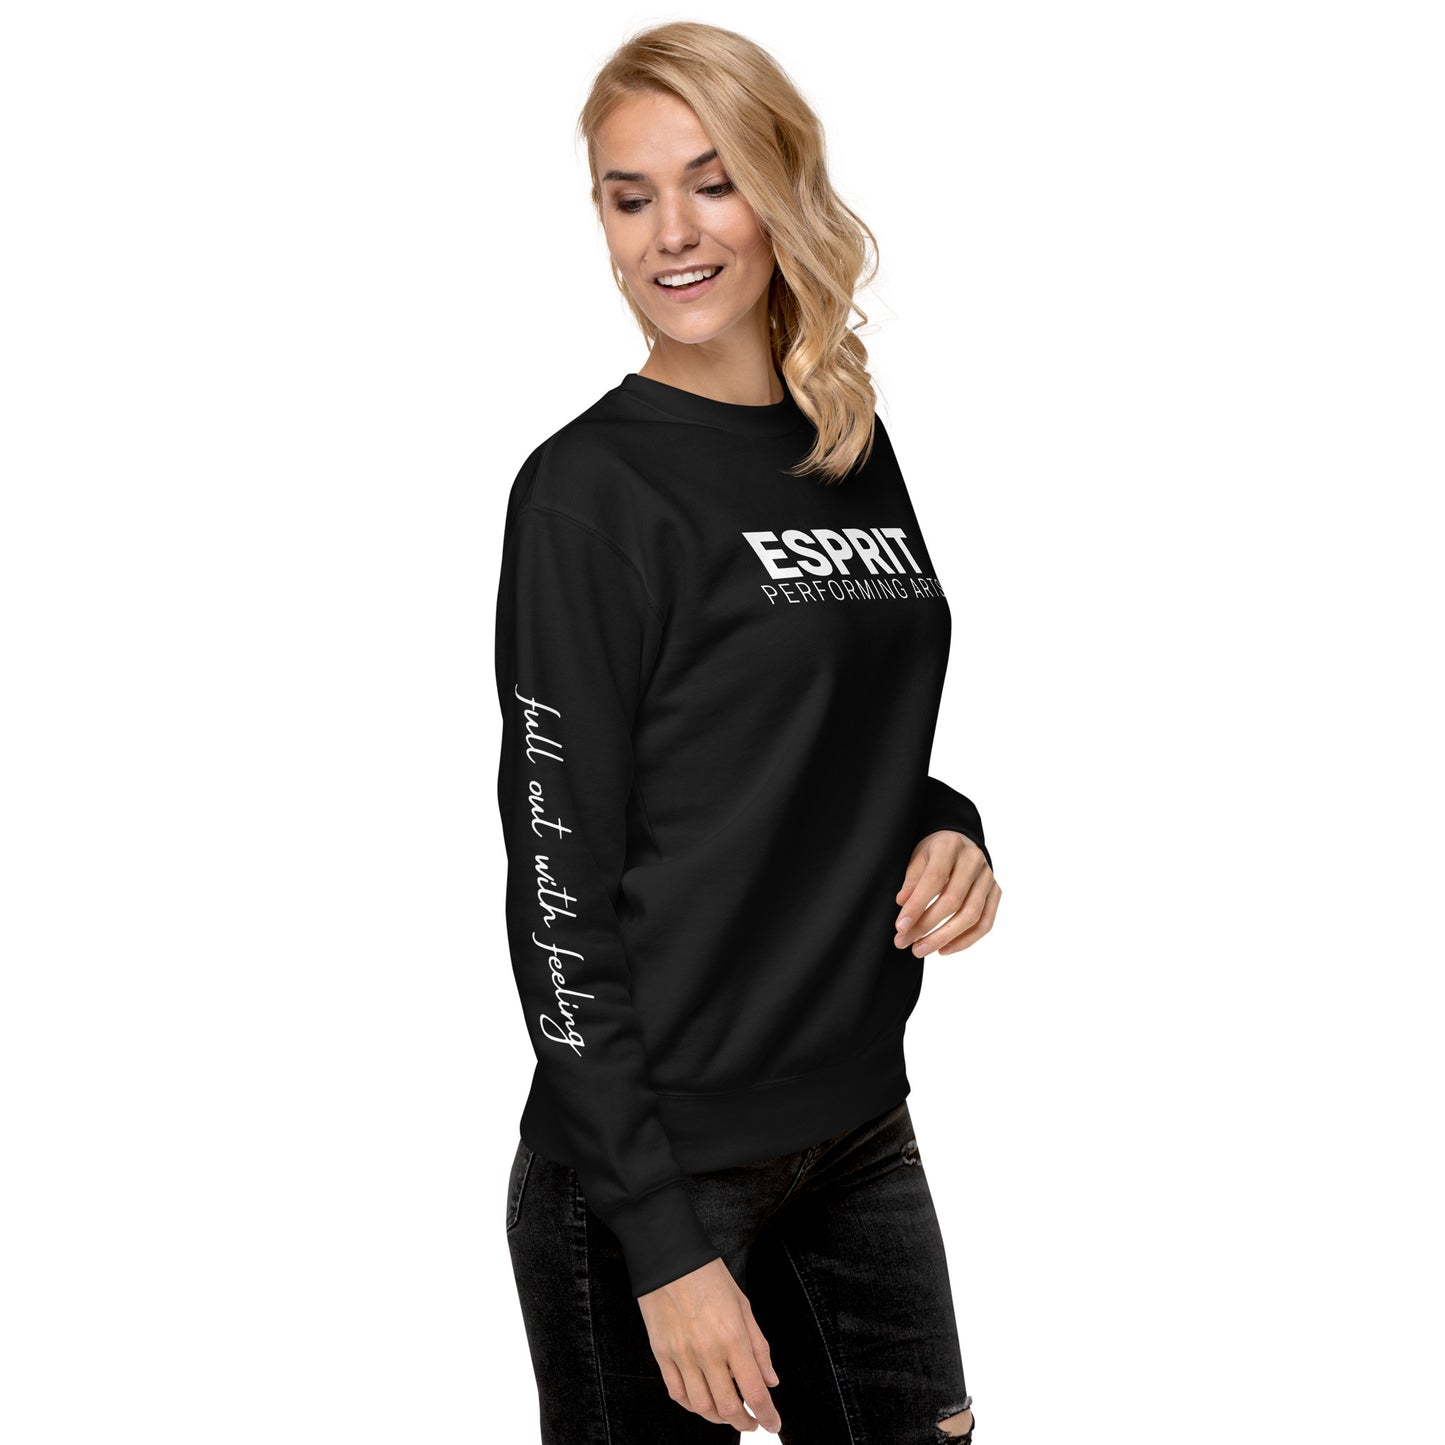 Esprit Performing Arts Adult Sweatshirt - "full out with feeling"